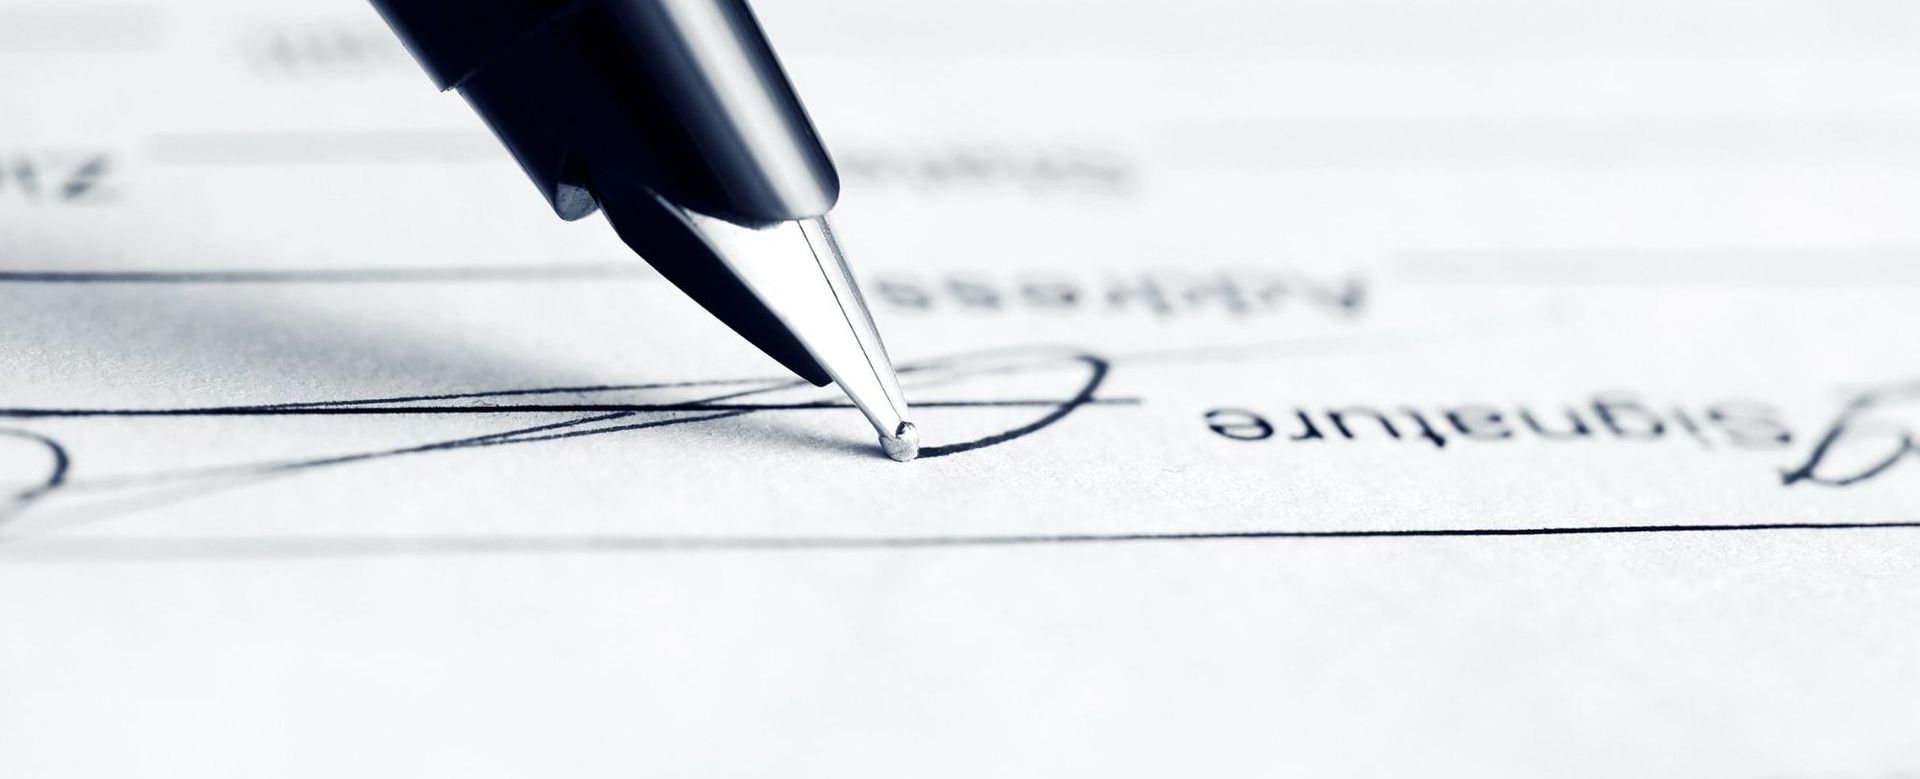 Ballpoint pen signing a lease document